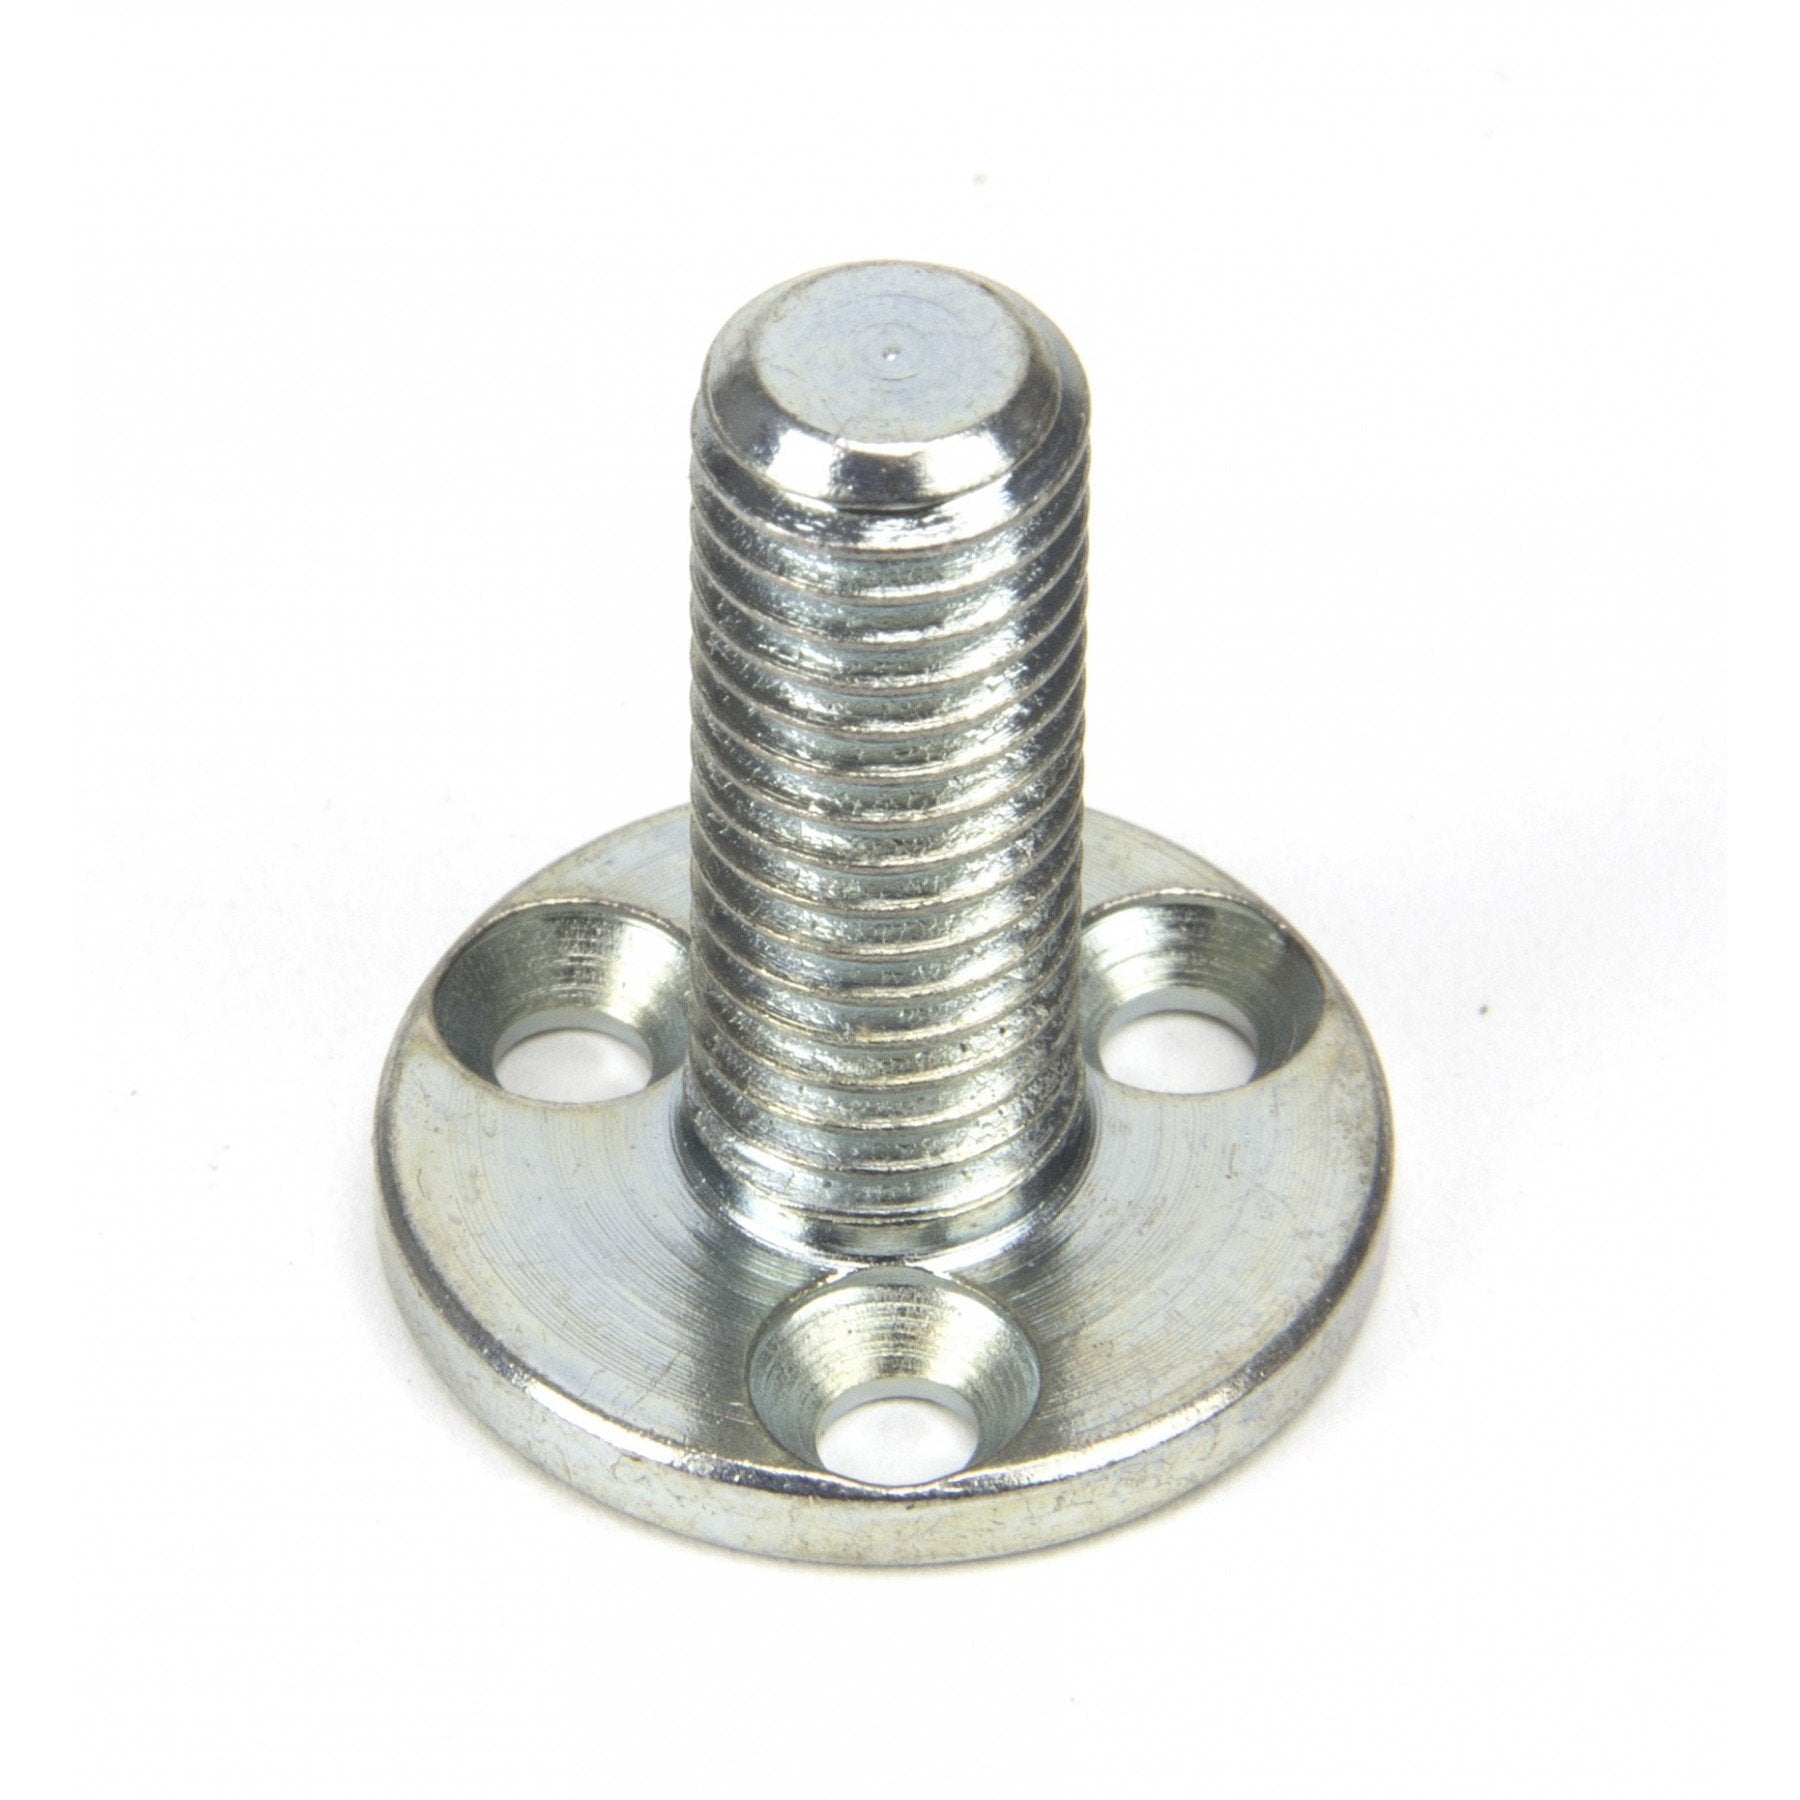 From the Anvil Threaded Taylors Spindle - Aluminium